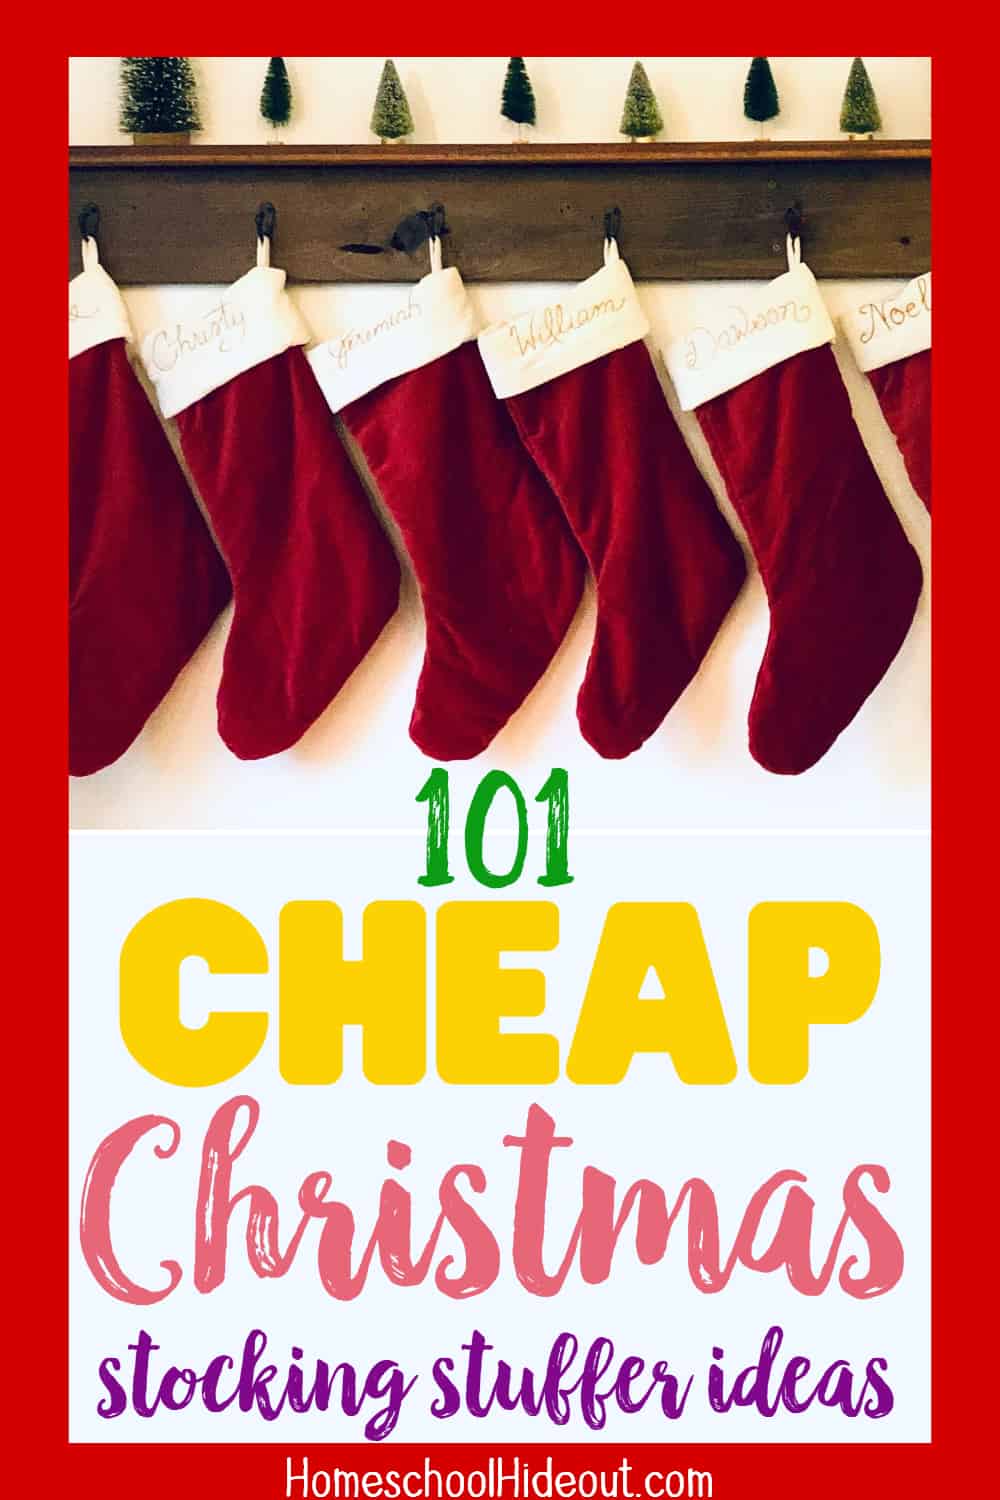 Christmas is so expensive so I'm LOVING this list of 101 cheap stocking stuffers! #68 and #31 are my favorites!